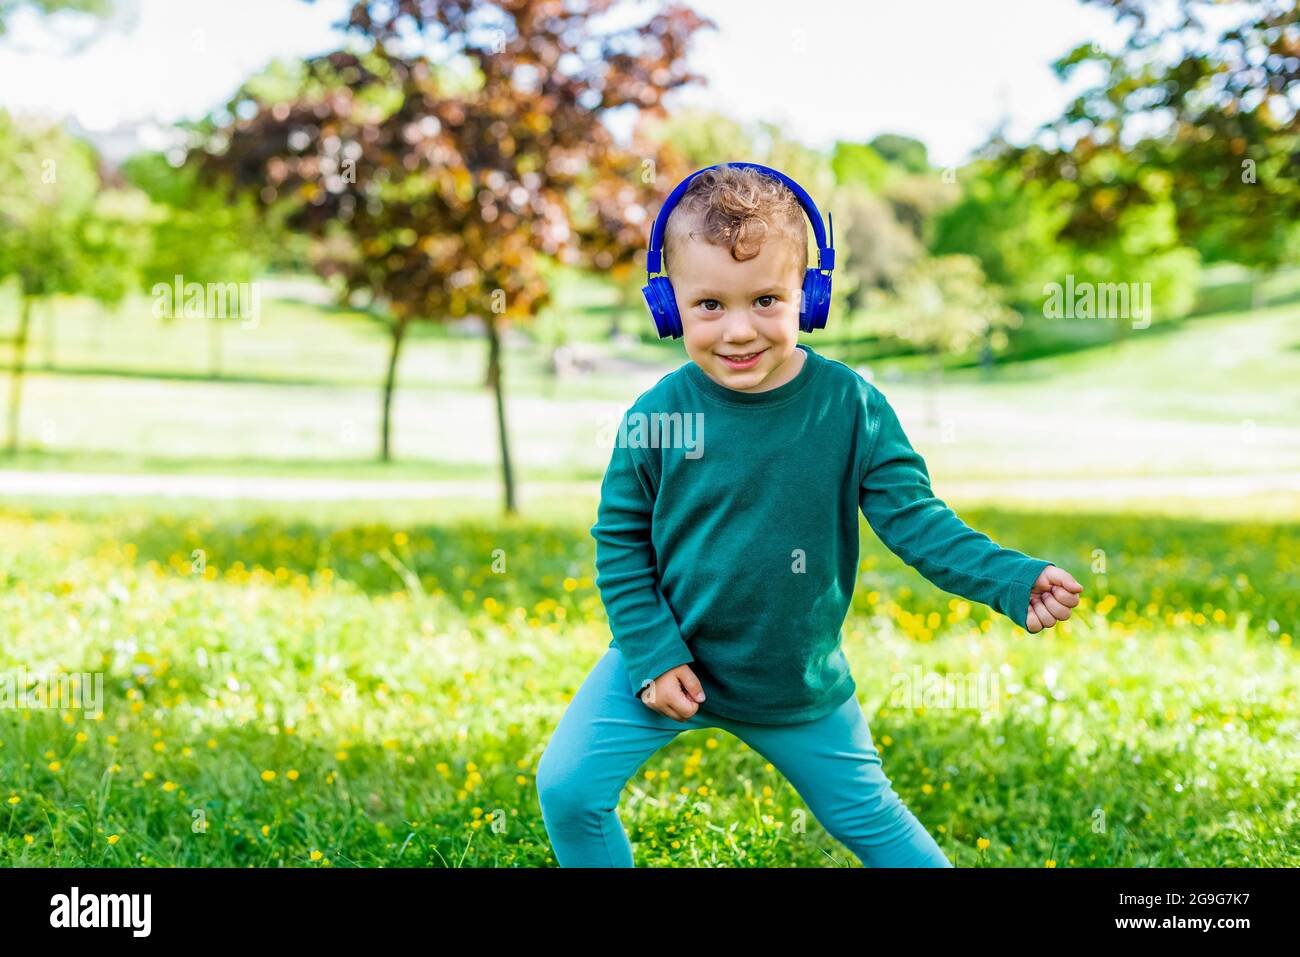 happy young kid listening to music outdoor in a park. smiling little child dancing outside in a garden wearing headphones and making fake guitar play Stock Photo